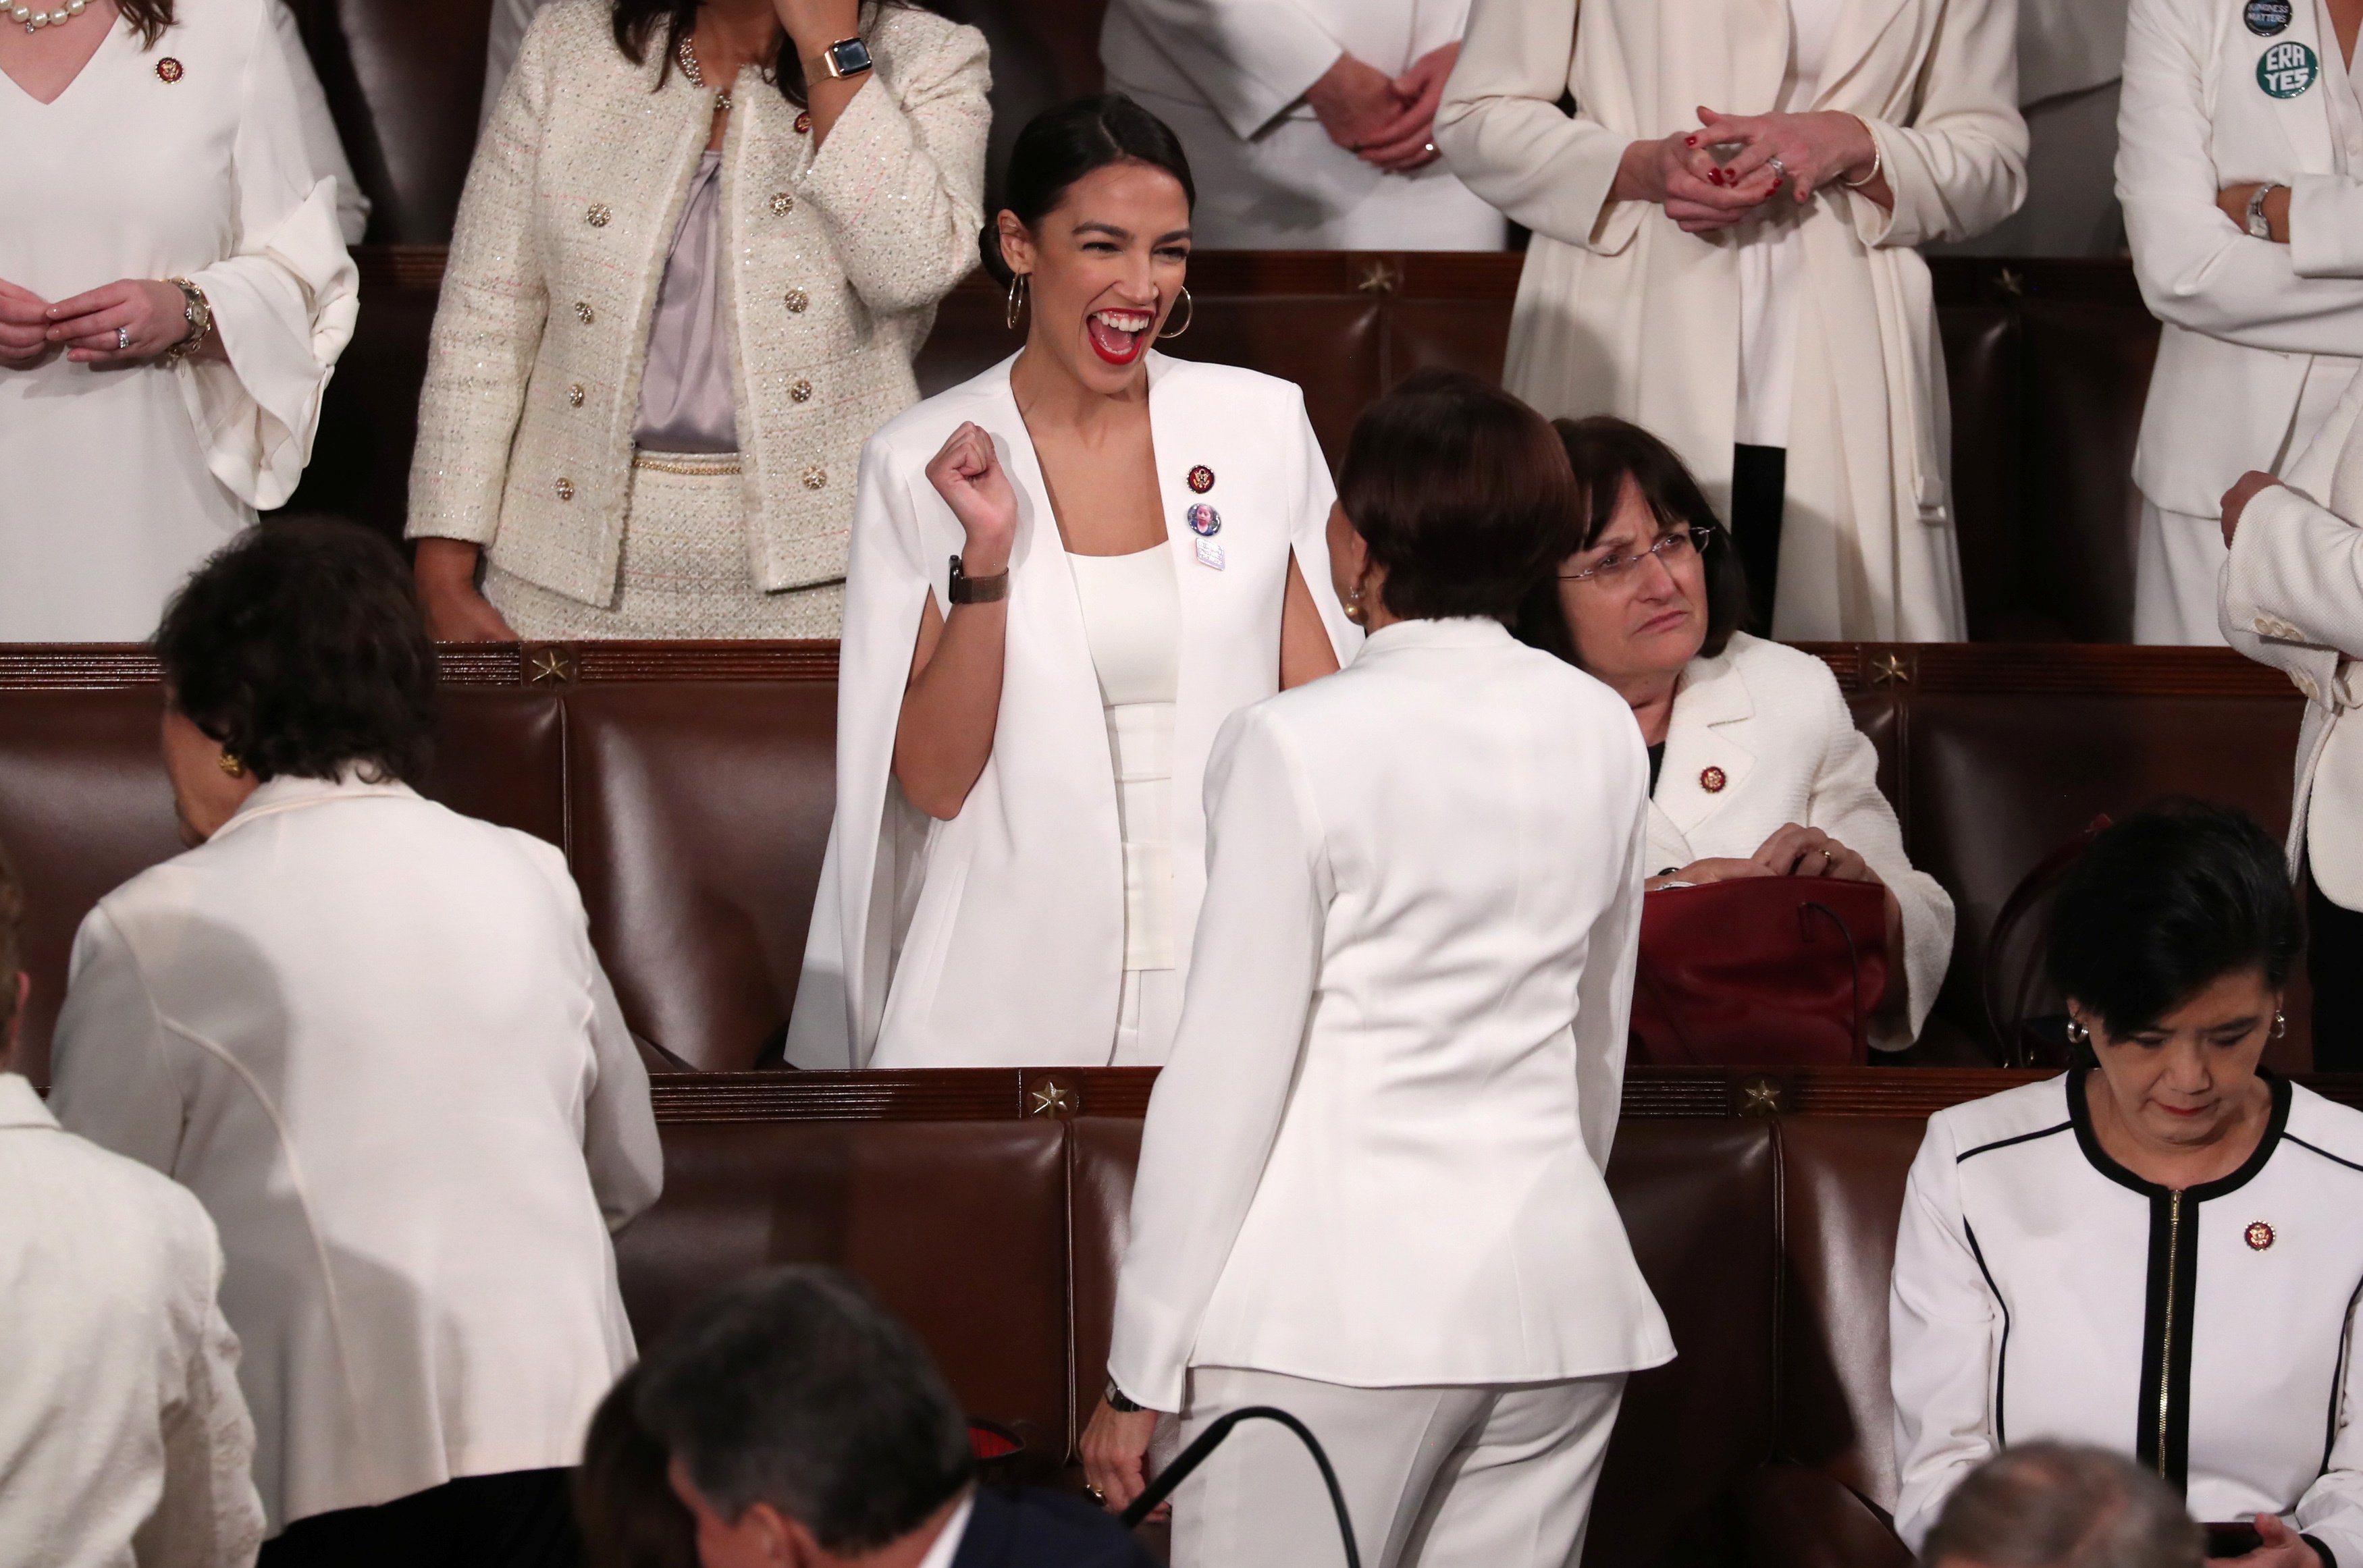 Rep. Ocasio-Cortez talks with a colleague as they await U.S. President Donald Trump's second State of the Union address to a joint session of the U.S. Congress in Washington